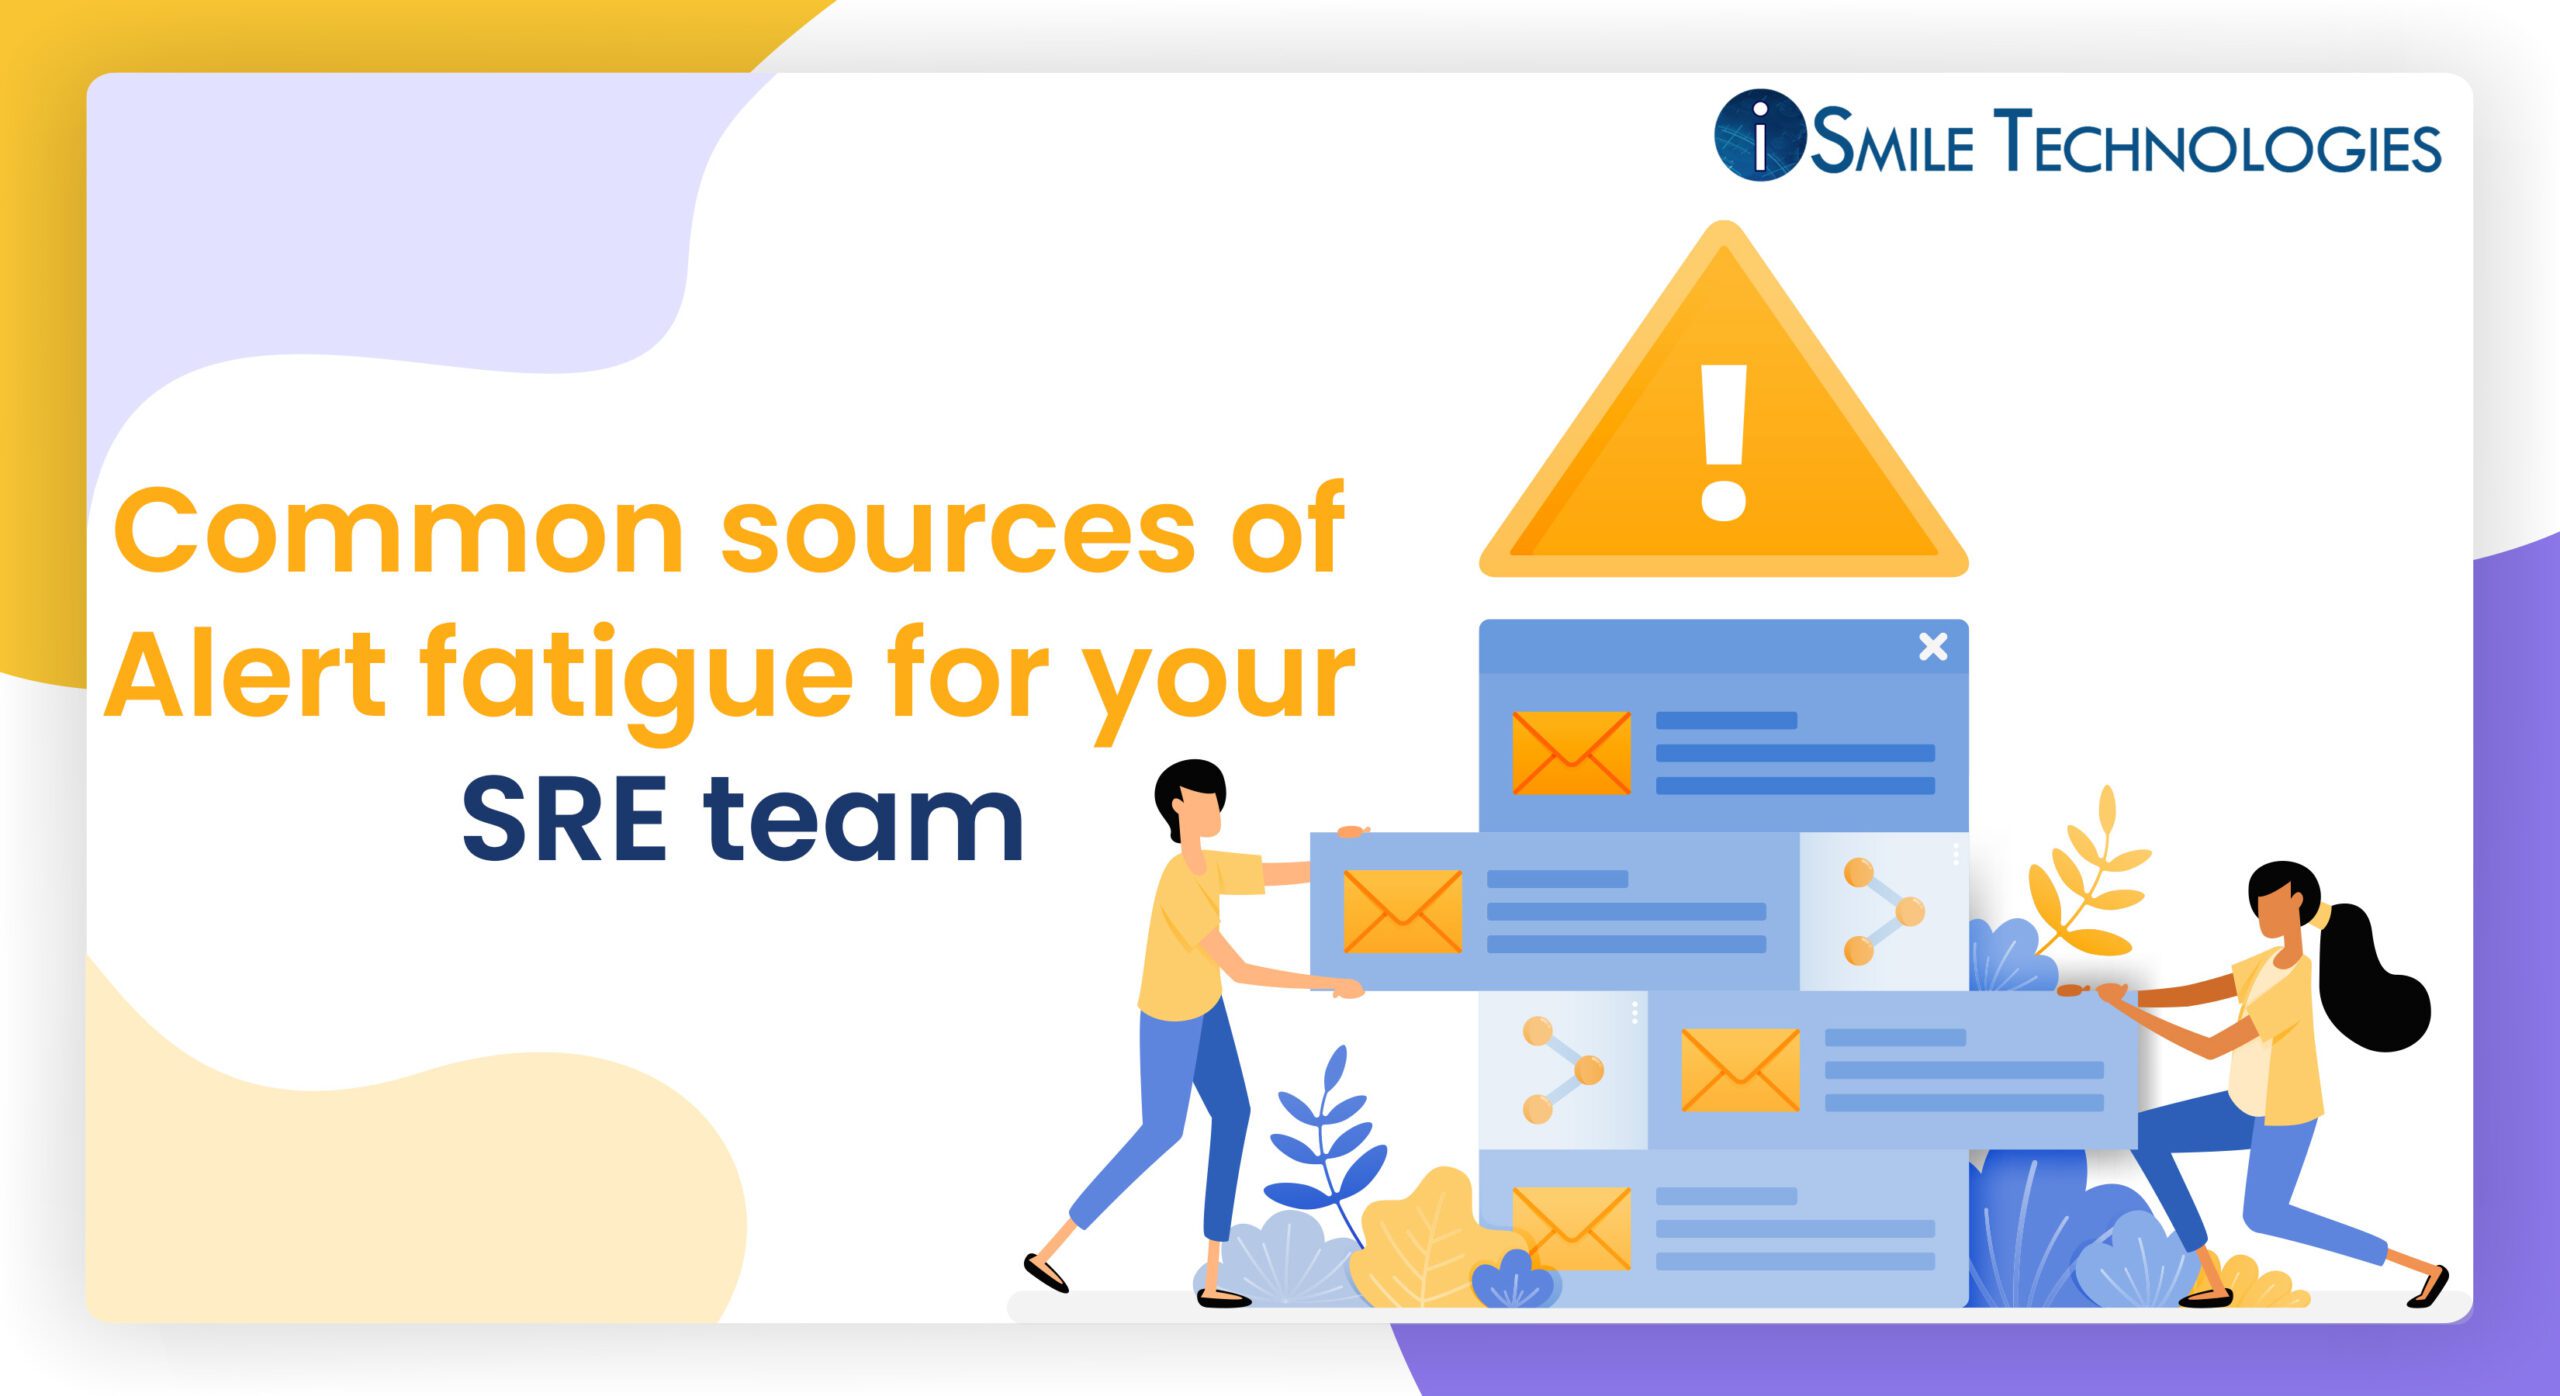 Common sources of Alert fatigue for your SRE team